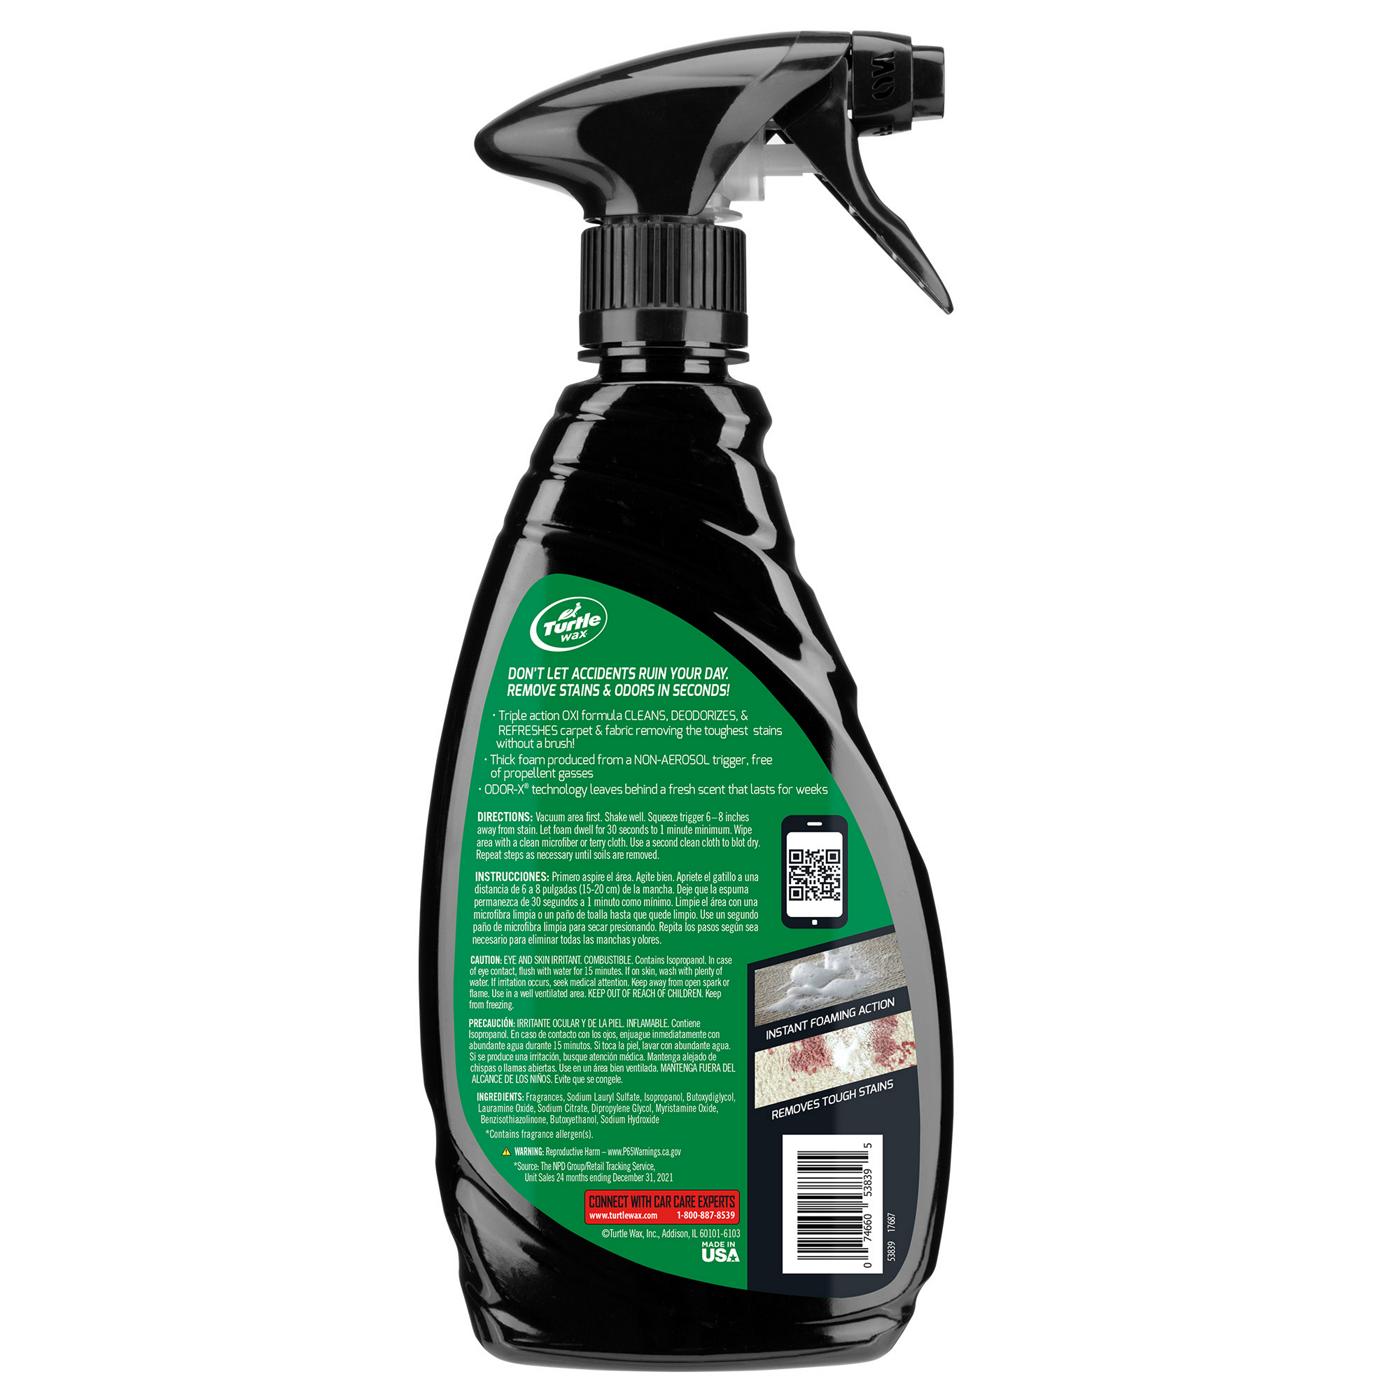 Turtle Wax Spot Clean Stain & Odor Remover; image 2 of 2